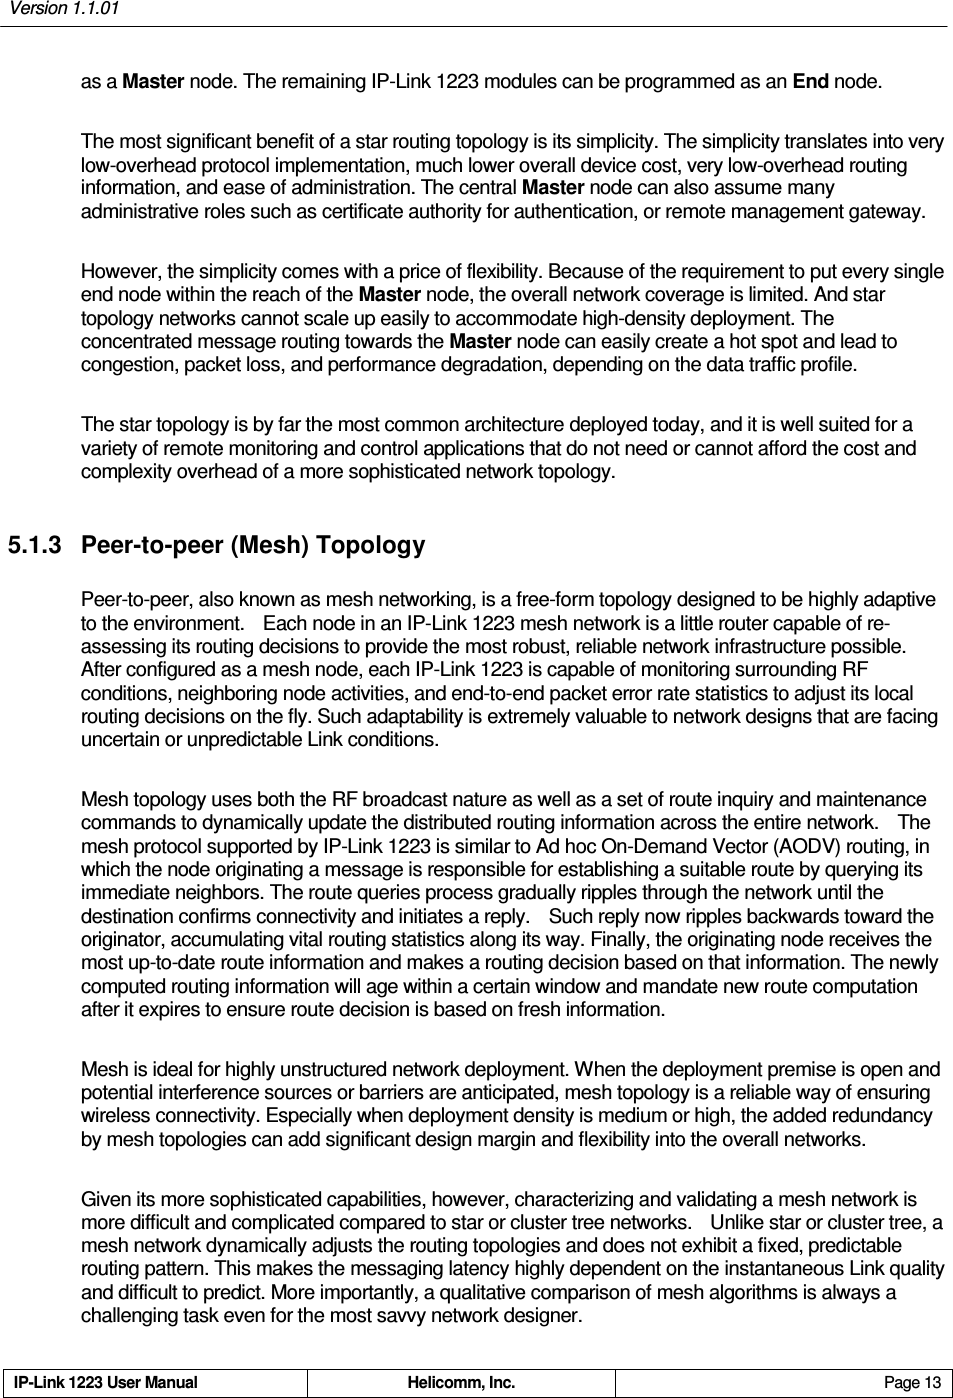 Version 1.1.01     IP-Link 1223 User Manual  Helicomm, Inc.  Page 13   as a Master node. The remaining IP-Link 1223 modules can be programmed as an End node.   The most significant benefit of a star routing topology is its simplicity. The simplicity translates into very low-overhead protocol implementation, much lower overall device cost, very low-overhead routing information, and ease of administration. The central Master node can also assume many administrative roles such as certificate authority for authentication, or remote management gateway. However, the simplicity comes with a price of flexibility. Because of the requirement to put every single end node within the reach of the Master node, the overall network coverage is limited. And star topology networks cannot scale up easily to accommodate high-density deployment. The concentrated message routing towards the Master node can easily create a hot spot and lead to congestion, packet loss, and performance degradation, depending on the data traffic profile. The star topology is by far the most common architecture deployed today, and it is well suited for a variety of remote monitoring and control applications that do not need or cannot afford the cost and complexity overhead of a more sophisticated network topology. 5.1.3  Peer-to-peer (Mesh) Topology   Peer-to-peer, also known as mesh networking, is a free-form topology designed to be highly adaptive to the environment.    Each node in an IP-Link 1223 mesh network is a little router capable of re-assessing its routing decisions to provide the most robust, reliable network infrastructure possible. After configured as a mesh node, each IP-Link 1223 is capable of monitoring surrounding RF conditions, neighboring node activities, and end-to-end packet error rate statistics to adjust its local routing decisions on the fly. Such adaptability is extremely valuable to network designs that are facing uncertain or unpredictable Link conditions.   Mesh topology uses both the RF broadcast nature as well as a set of route inquiry and maintenance commands to dynamically update the distributed routing information across the entire network.    The mesh protocol supported by IP-Link 1223 is similar to Ad hoc On-Demand Vector (AODV) routing, in which the node originating a message is responsible for establishing a suitable route by querying its immediate neighbors. The route queries process gradually ripples through the network until the destination confirms connectivity and initiates a reply.    Such reply now ripples backwards toward the originator, accumulating vital routing statistics along its way. Finally, the originating node receives the most up-to-date route information and makes a routing decision based on that information. The newly computed routing information will age within a certain window and mandate new route computation after it expires to ensure route decision is based on fresh information. Mesh is ideal for highly unstructured network deployment. When the deployment premise is open and potential interference sources or barriers are anticipated, mesh topology is a reliable way of ensuring wireless connectivity. Especially when deployment density is medium or high, the added redundancy by mesh topologies can add significant design margin and flexibility into the overall networks. Given its more sophisticated capabilities, however, characterizing and validating a mesh network is more difficult and complicated compared to star or cluster tree networks.    Unlike star or cluster tree, a mesh network dynamically adjusts the routing topologies and does not exhibit a fixed, predictable routing pattern. This makes the messaging latency highly dependent on the instantaneous Link quality and difficult to predict. More importantly, a qualitative comparison of mesh algorithms is always a challenging task even for the most savvy network designer. 